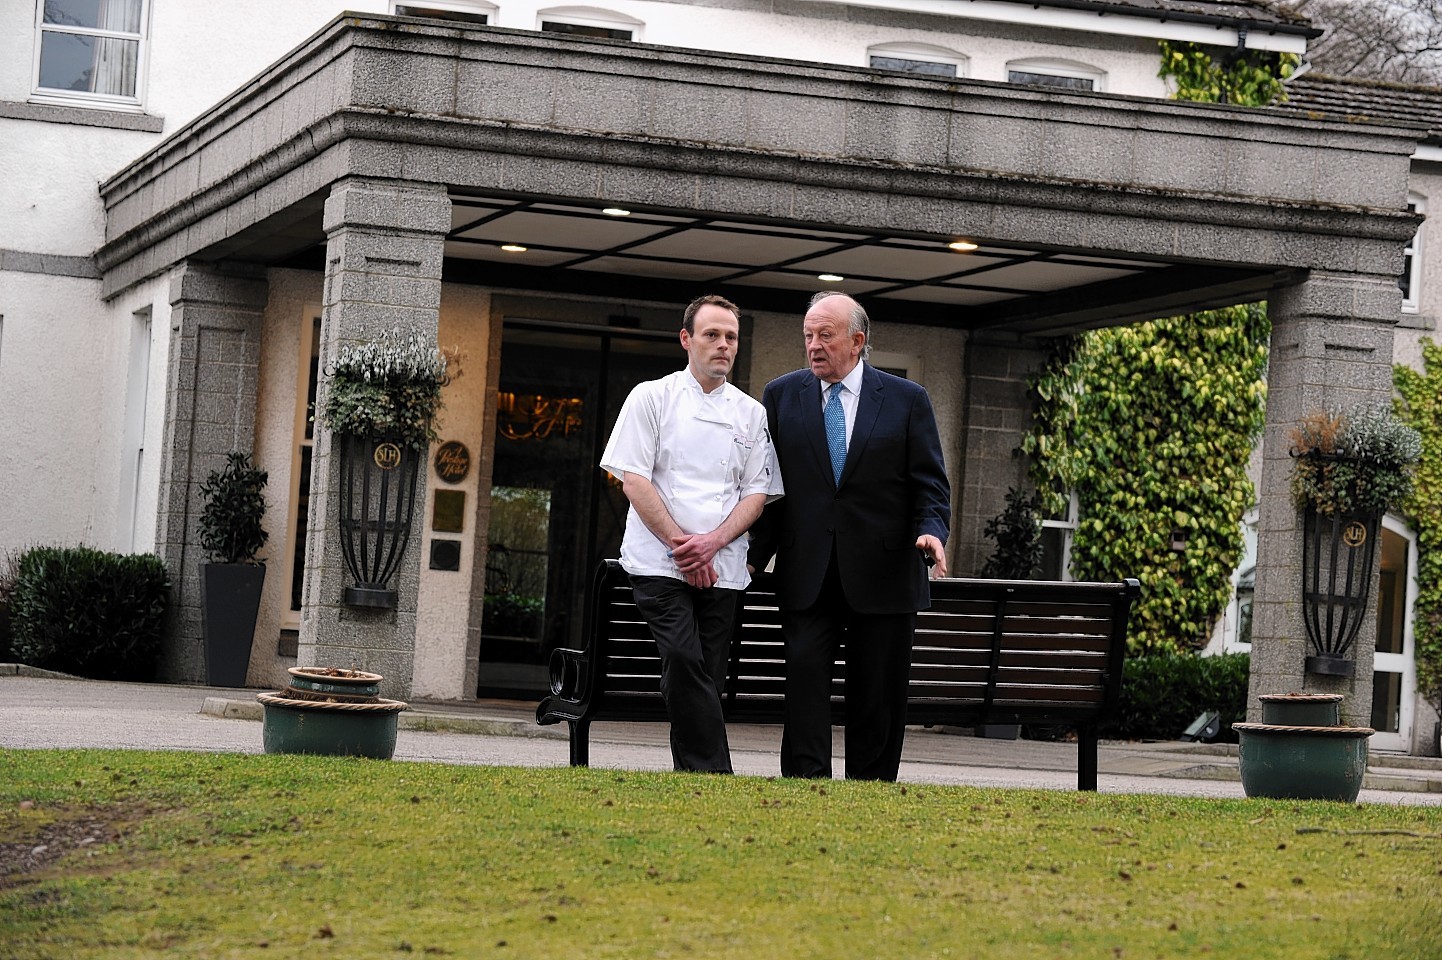 Stewart Spence, owner of the Marcliffe Hotel and his son, Ross Spence, made the announcement yesterday